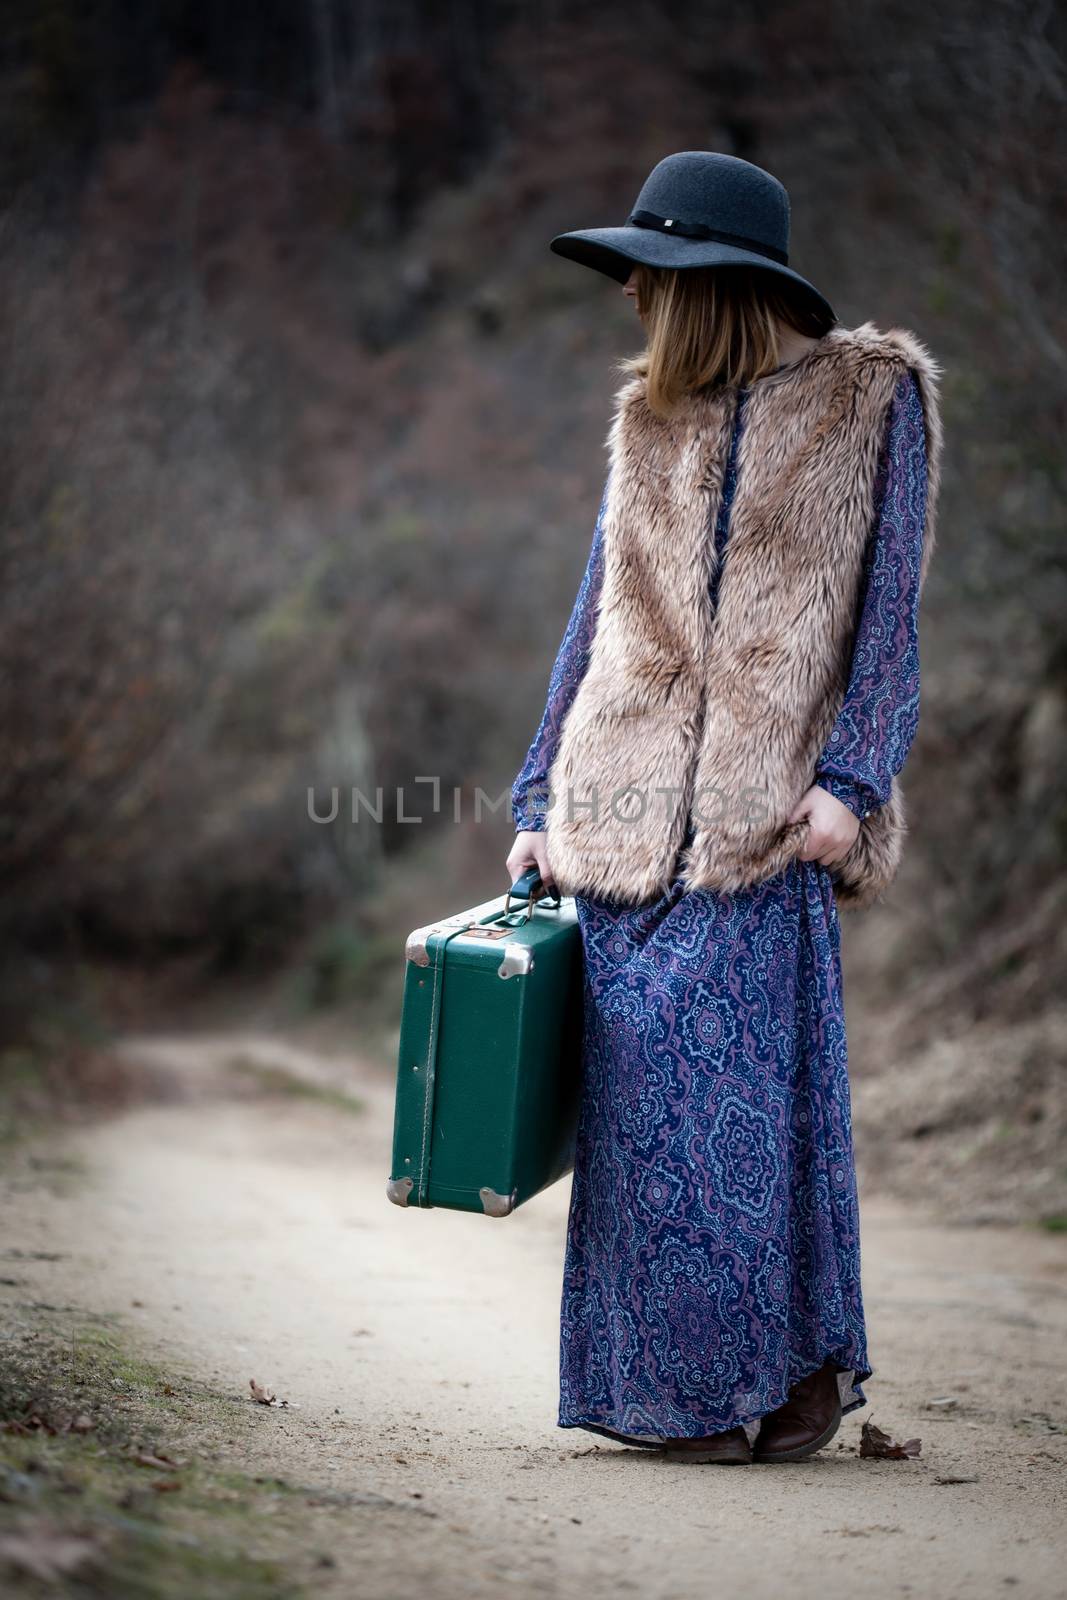 pretty girl with vintage case on a dirtroad by kokimk